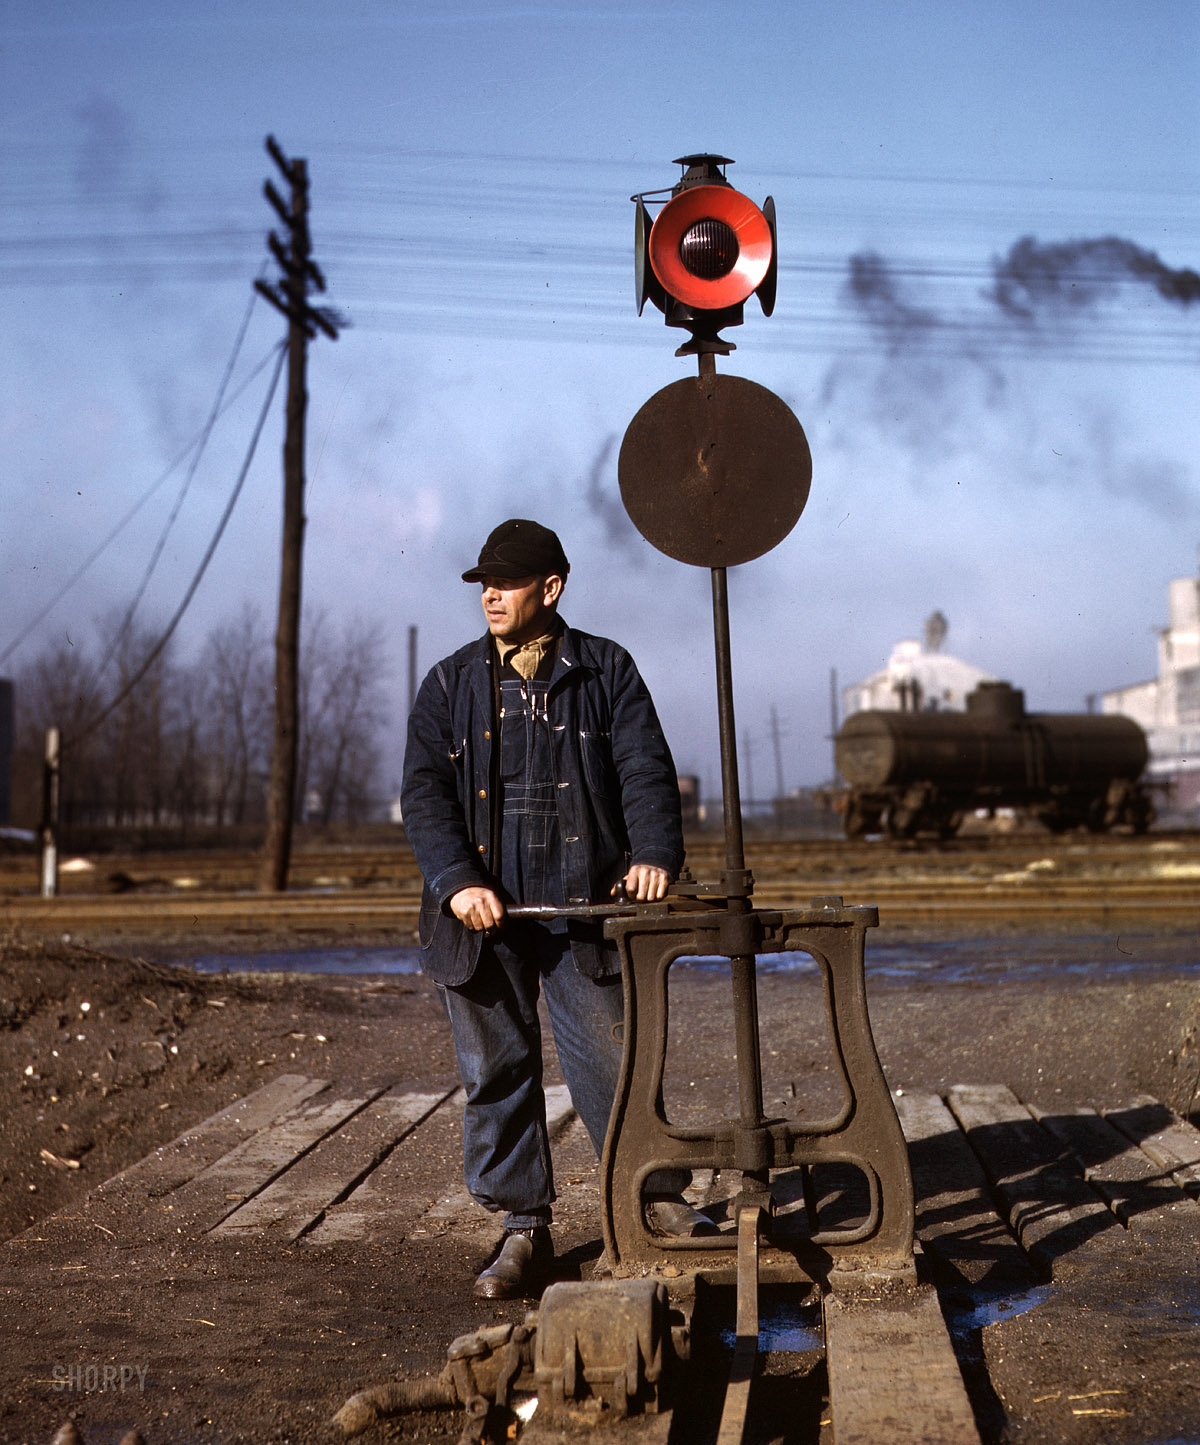 February 1943. "Daniel Senise throwing a switch in an Indiana Harbor Belt Line railyard." 4x5 Kodachrome transparency by Jack Delano. View full size.